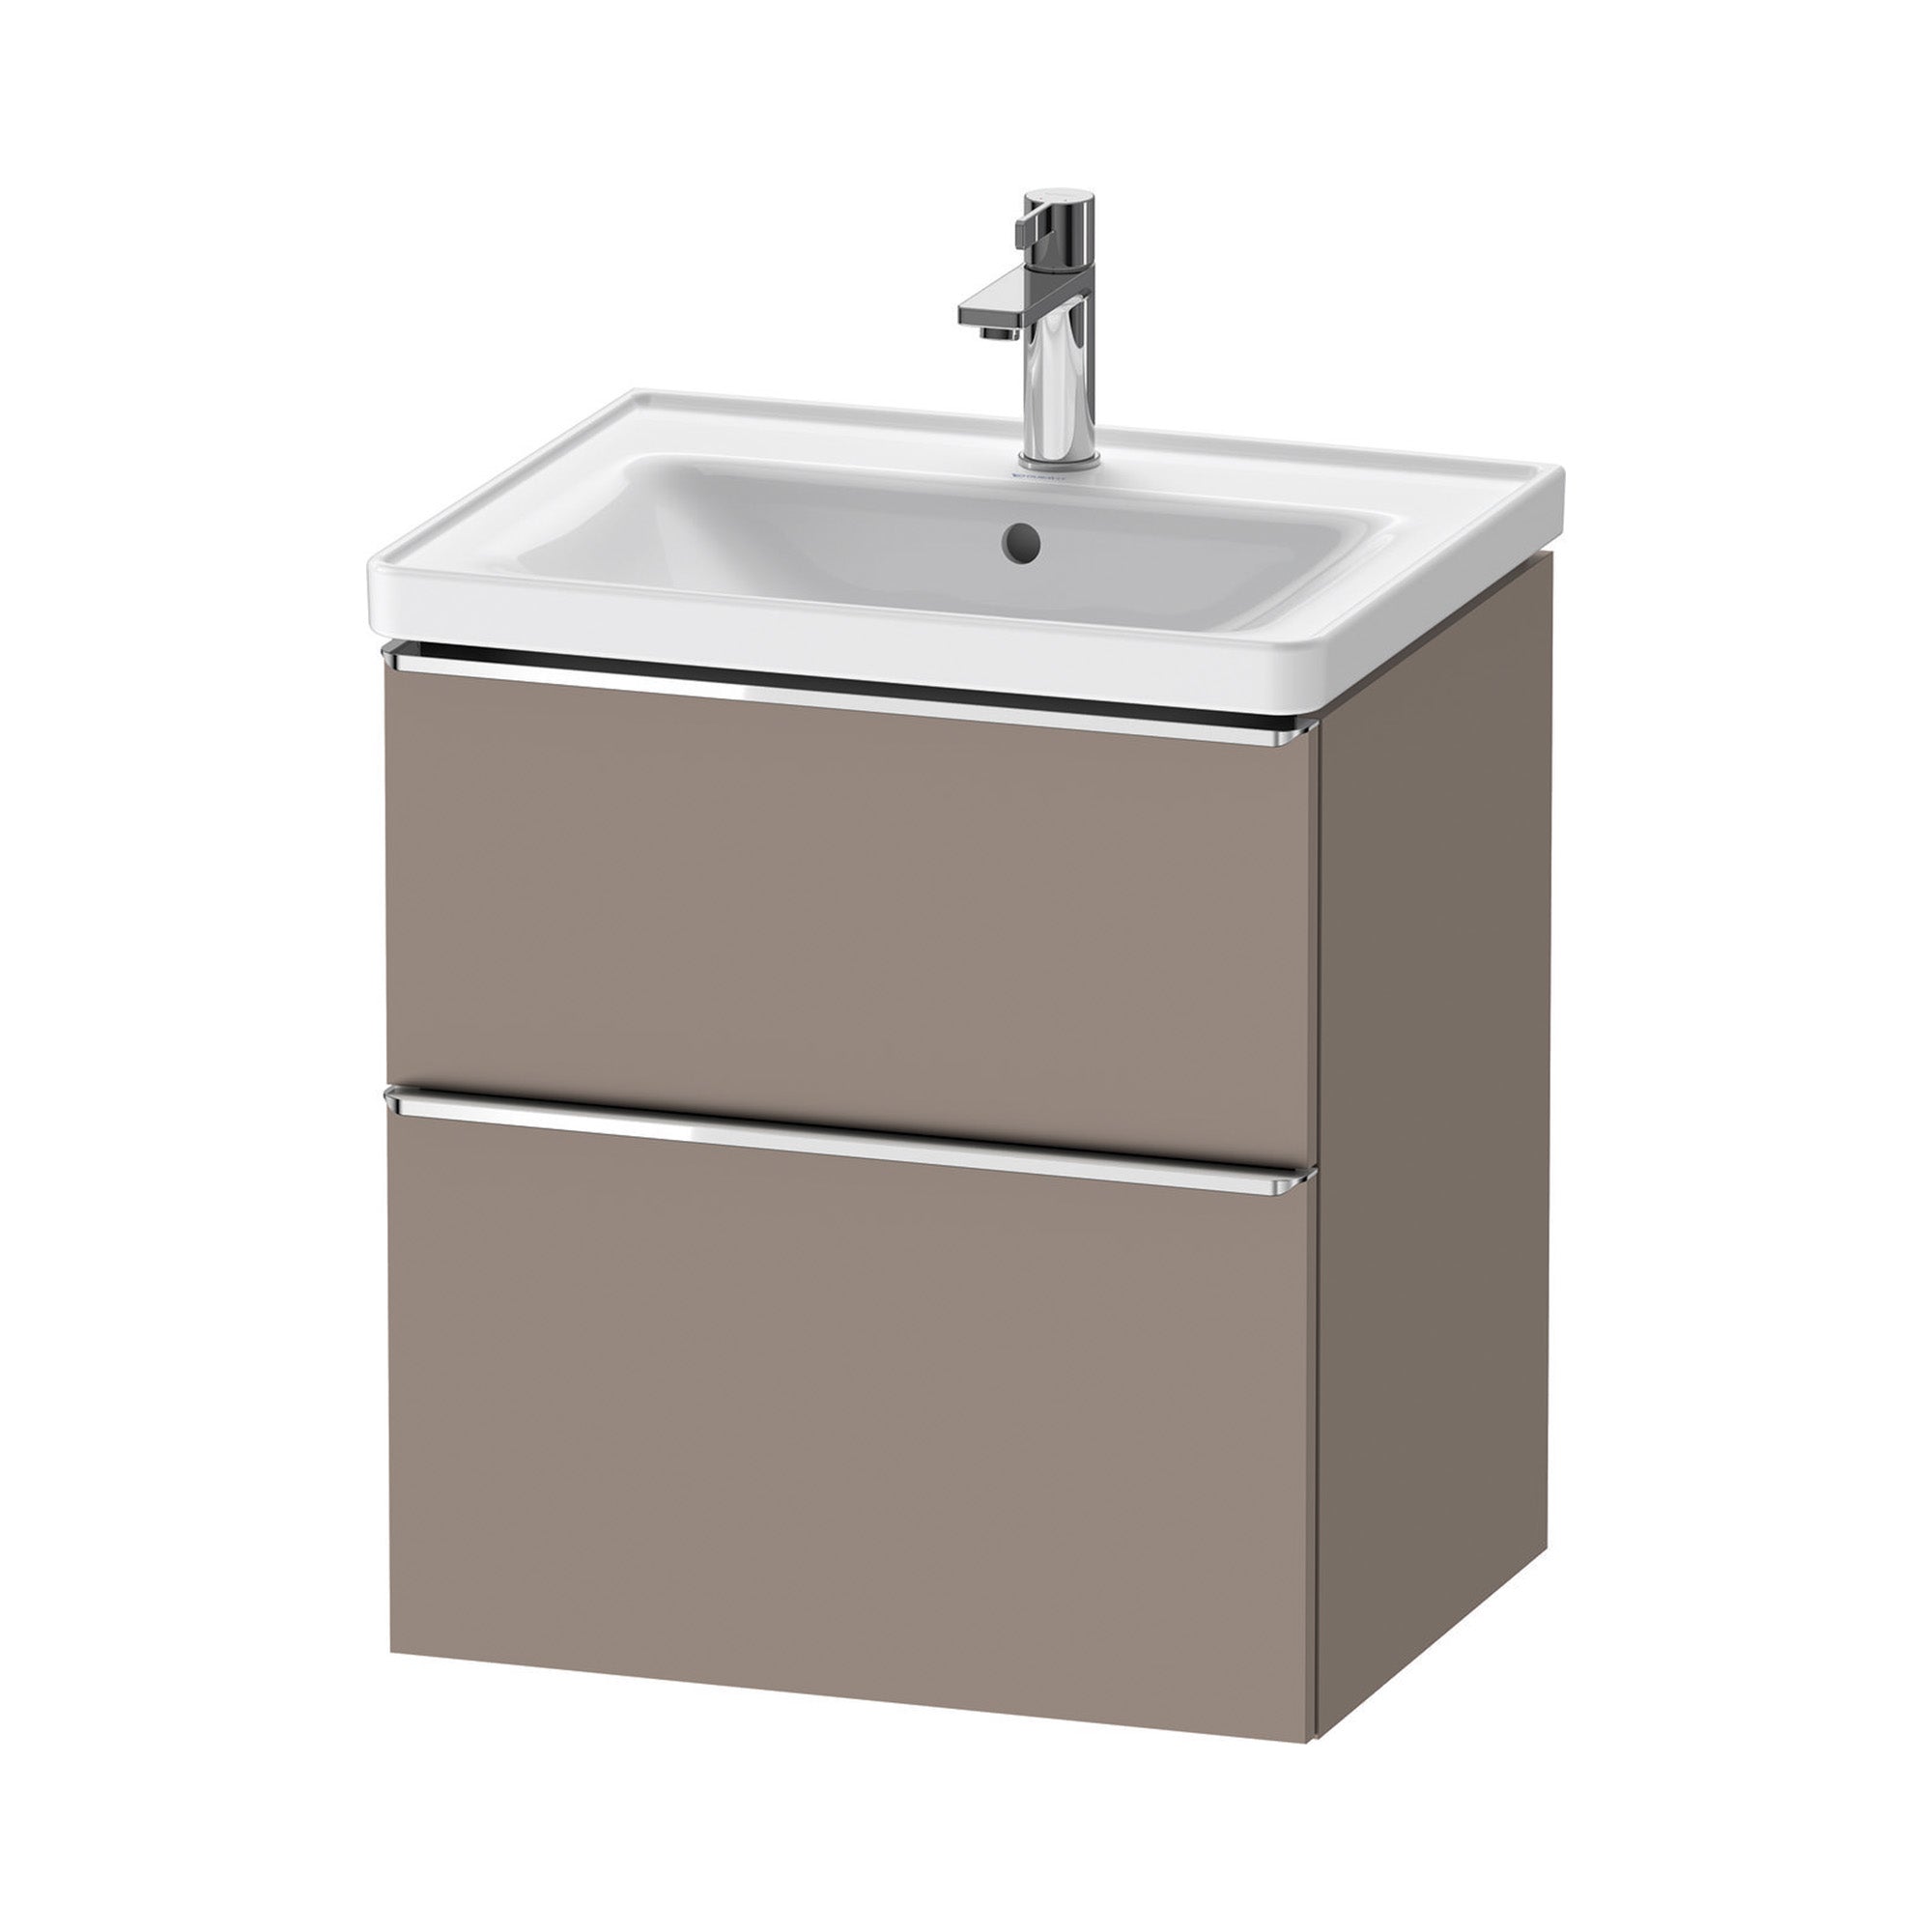 duravit d-neo 600 wall mounted vanity unit with d-neo basin basalt chrome handles